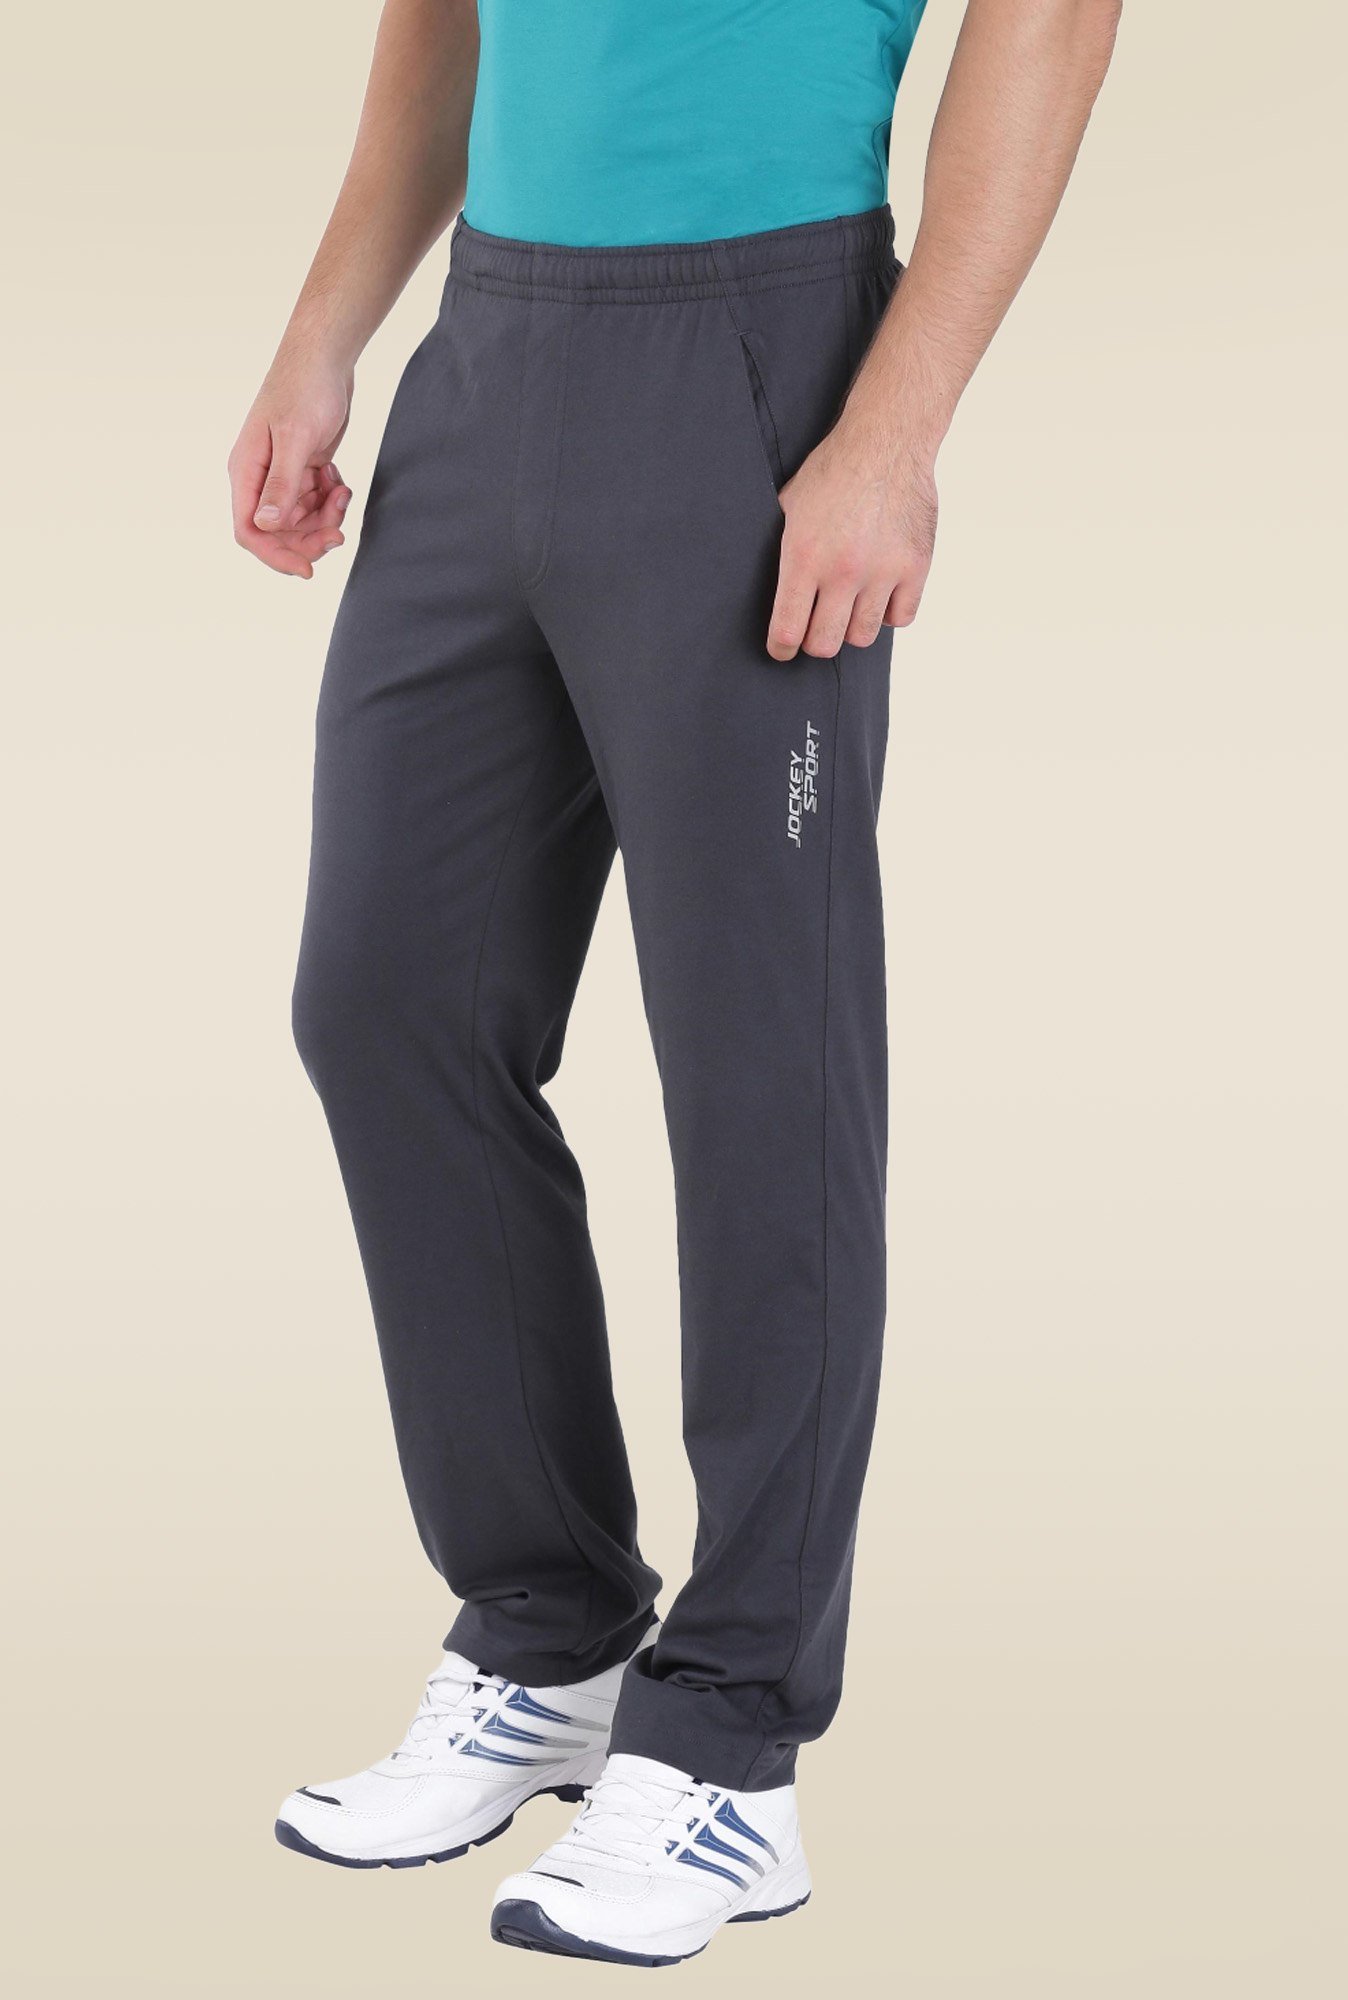 Grey Joggers Buy Grey Joggers for Men Online at Best Price  Jockey India